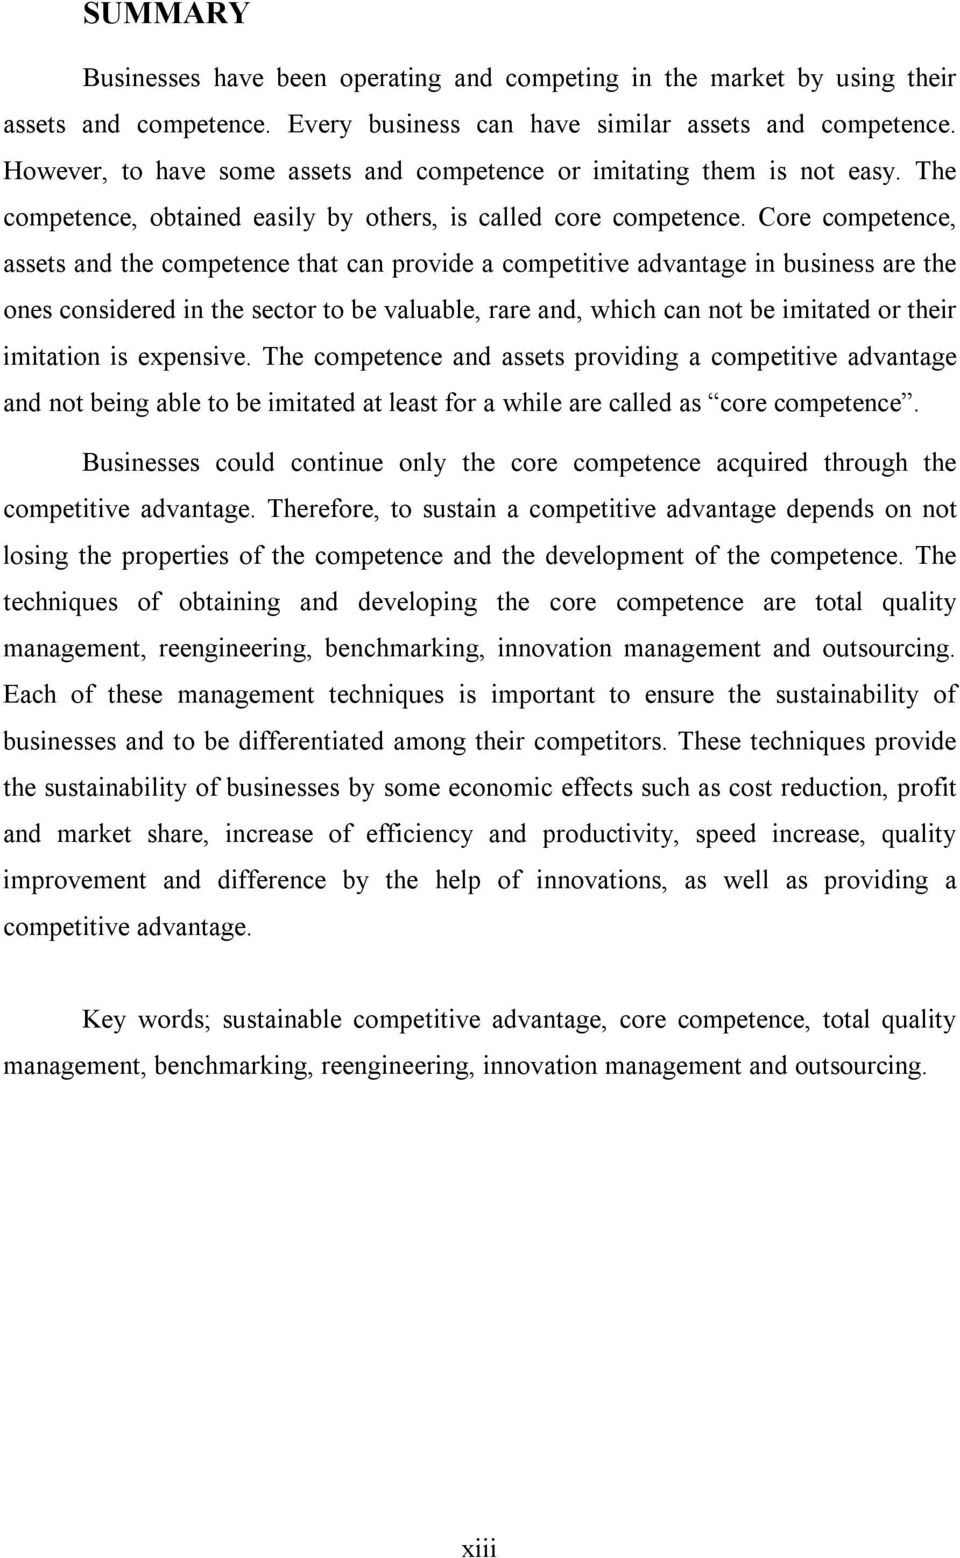 Core competence, assets and the competence that can provide a competitive advantage in business are the ones considered in the sector to be valuable, rare and, which can not be imitated or their